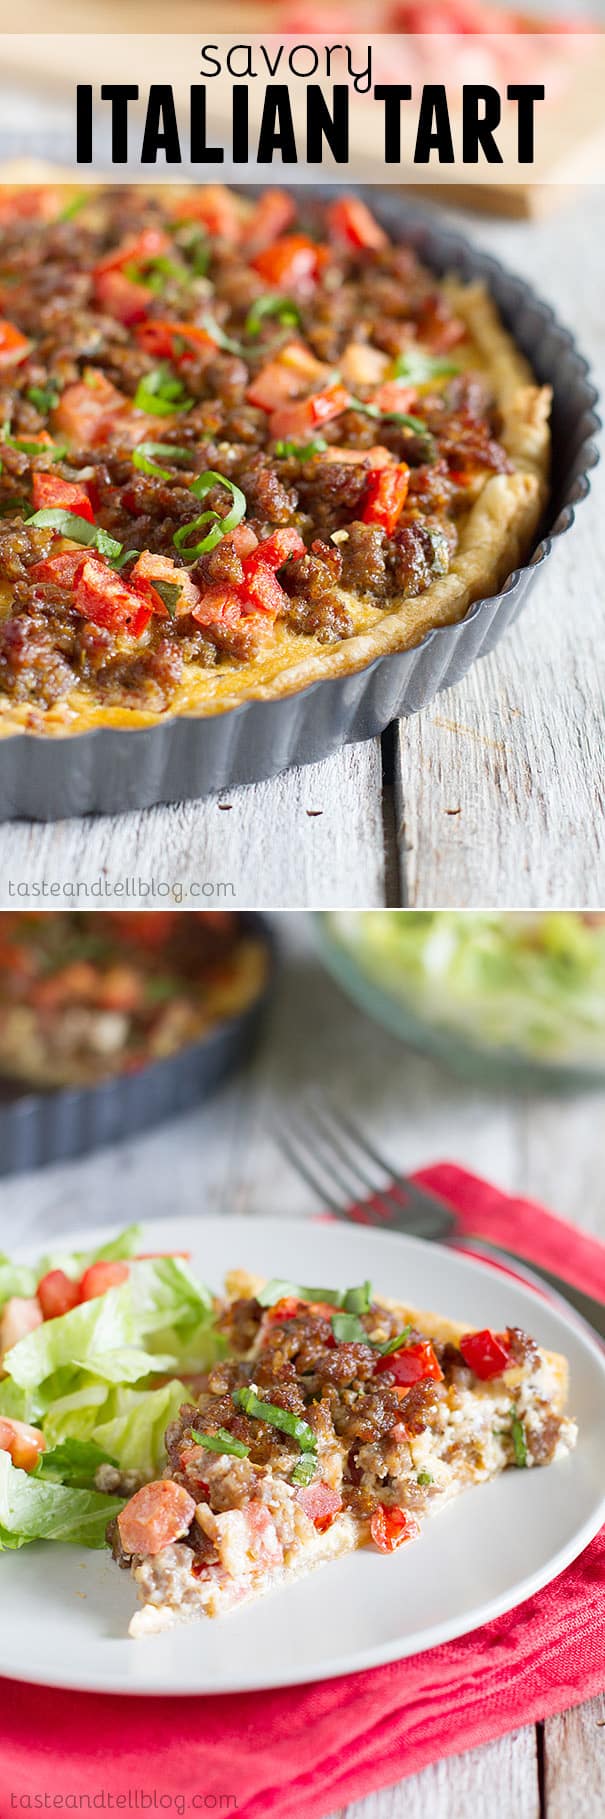 Savory Italian Tart - This quiche-like Italian tart is filled with Italian sausage, tomatoes, eggs and cheese, all on top of a puff pastry crust. Perfect for breakfast, lunch or dinner!